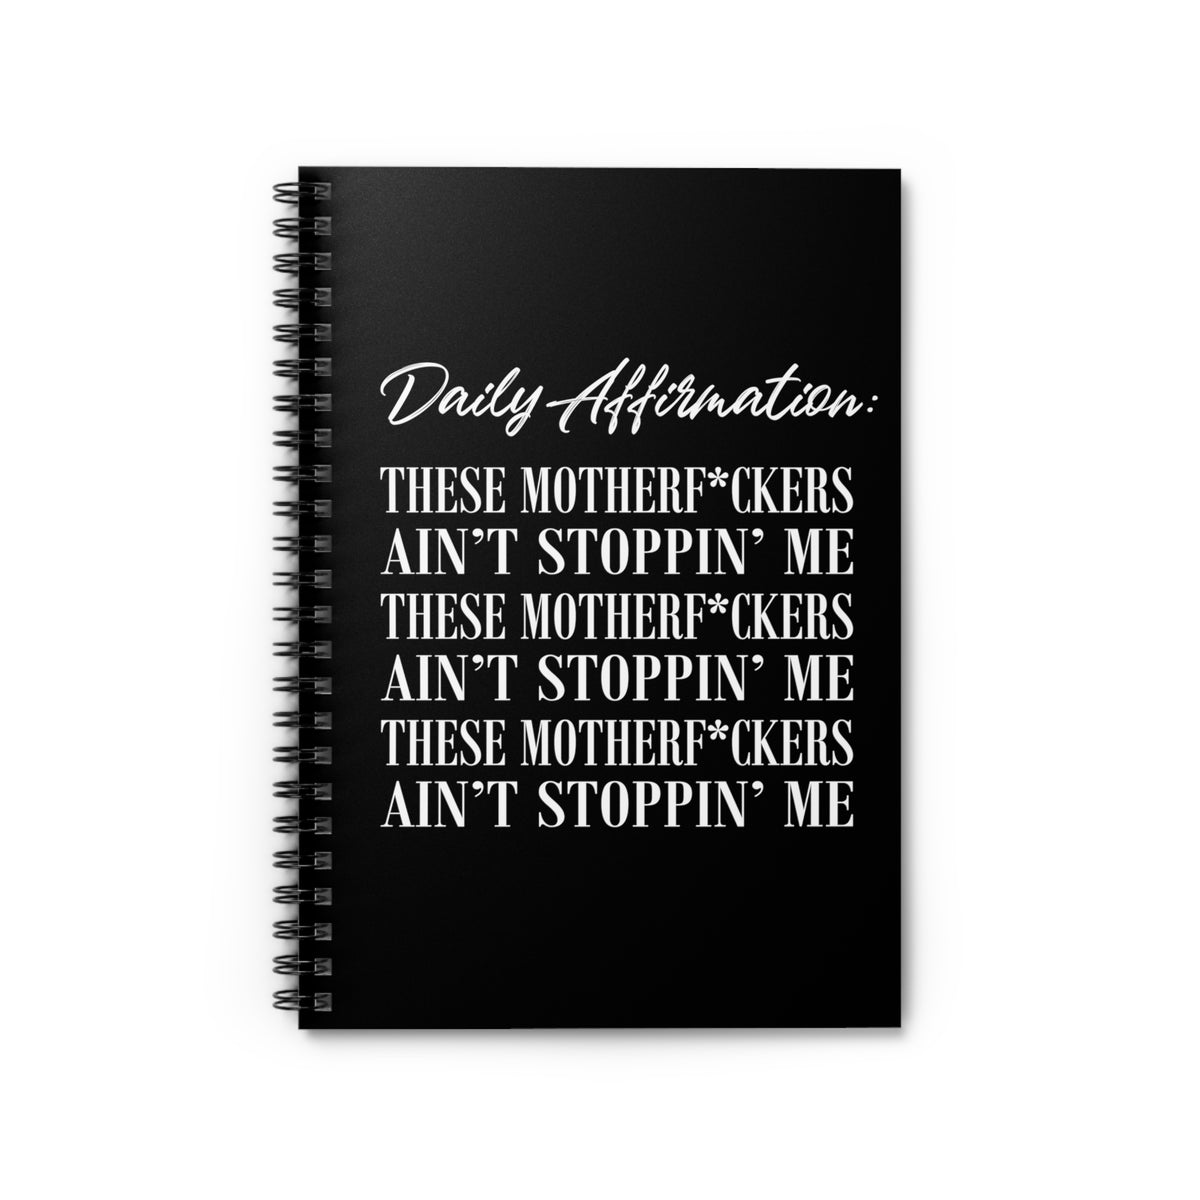 Daily Affirmation: The Motherf*ckers Ain Stoppin' Me Spiral Notebook - Black